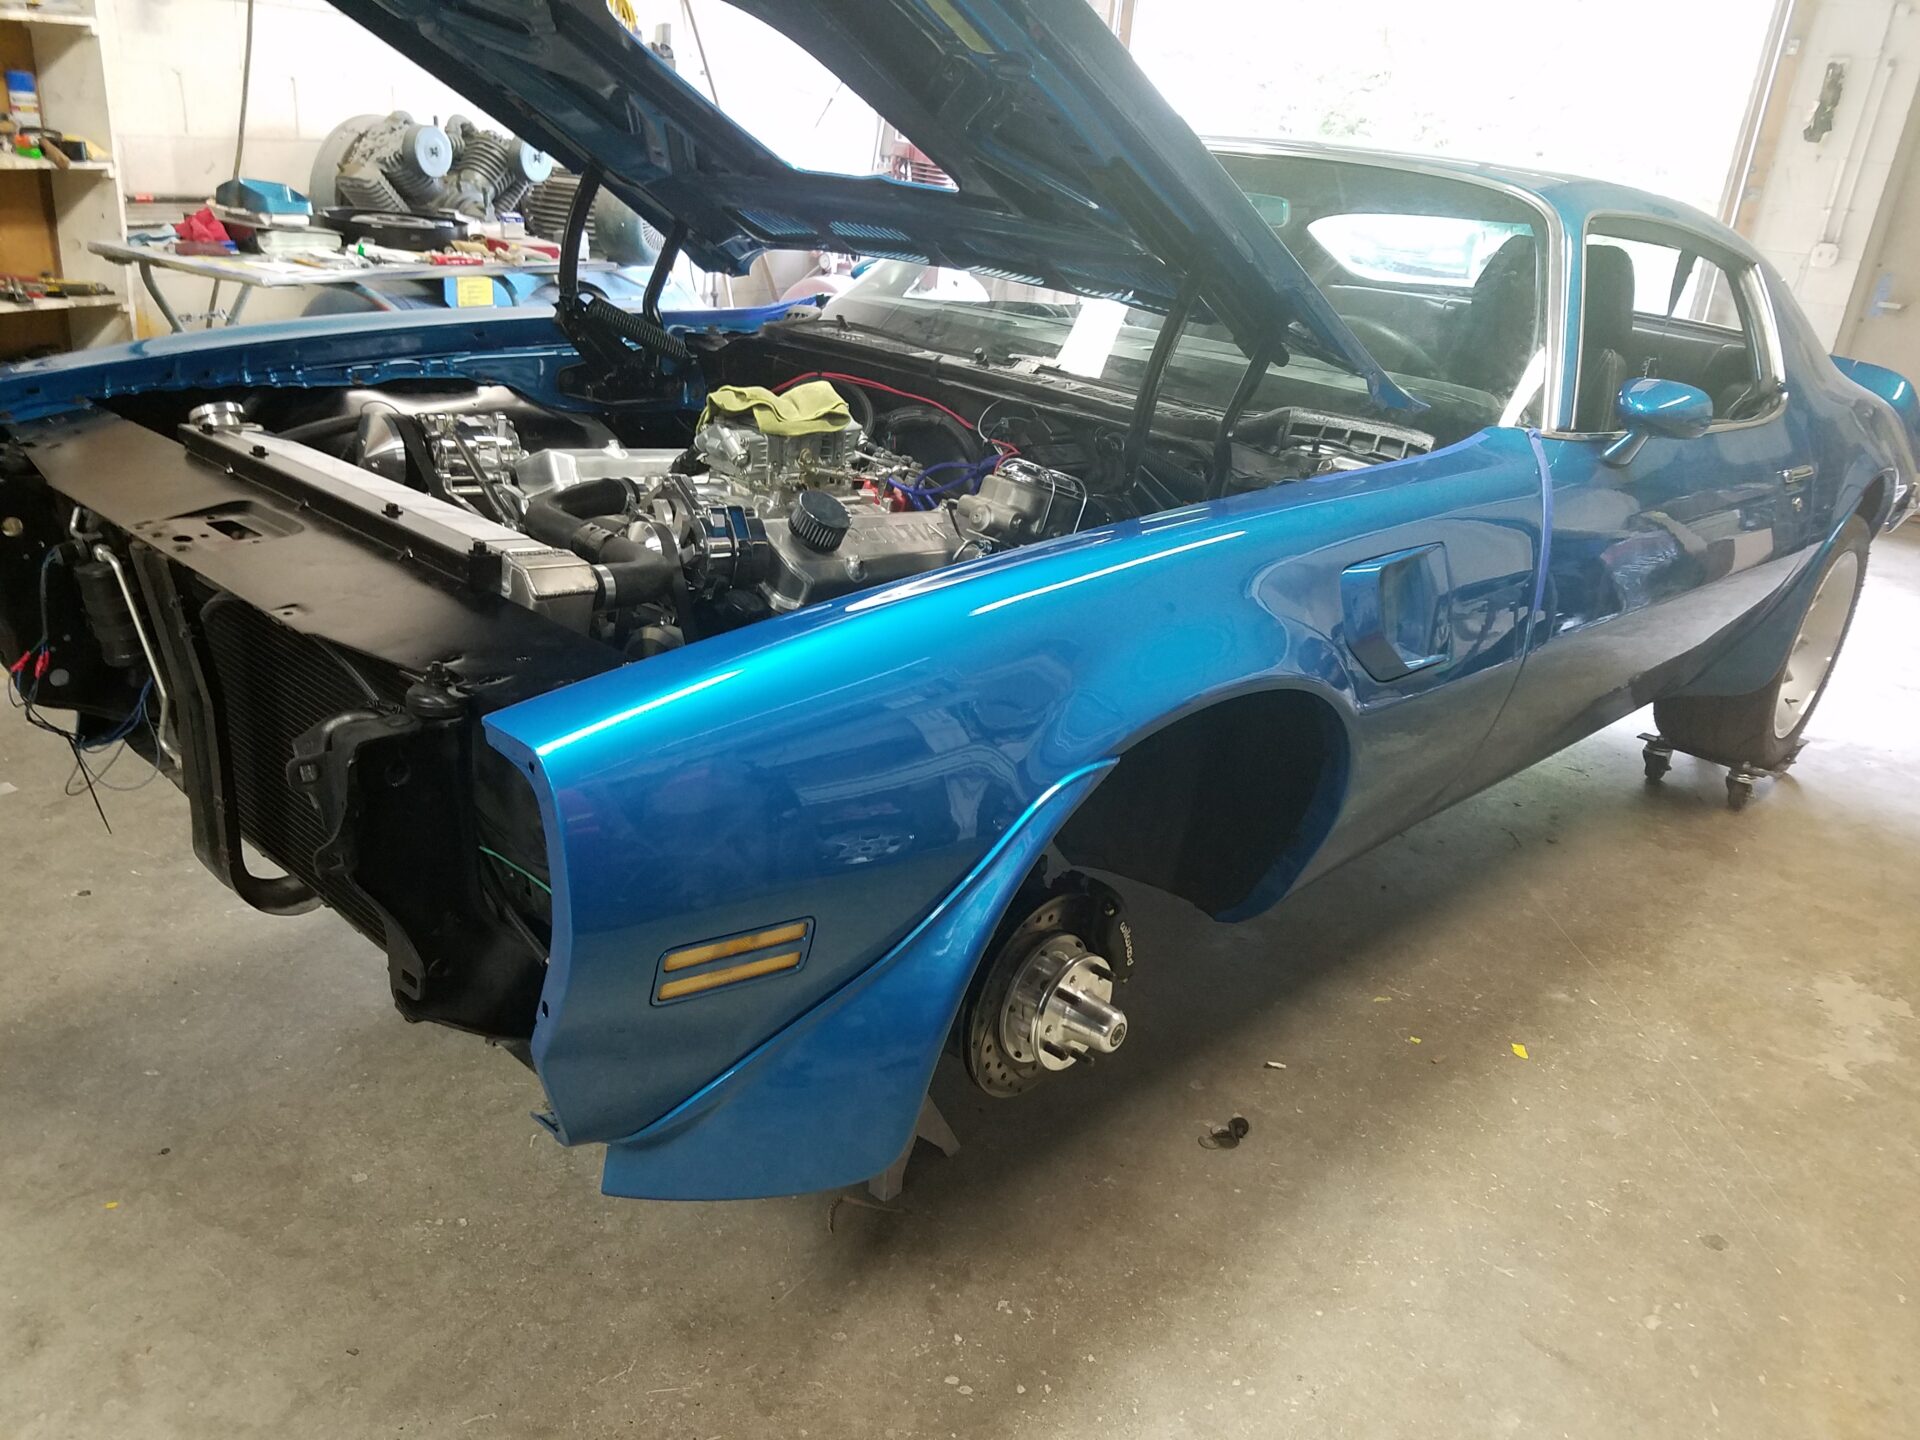 The hood attached to the 1971 Pontiac Trans Am